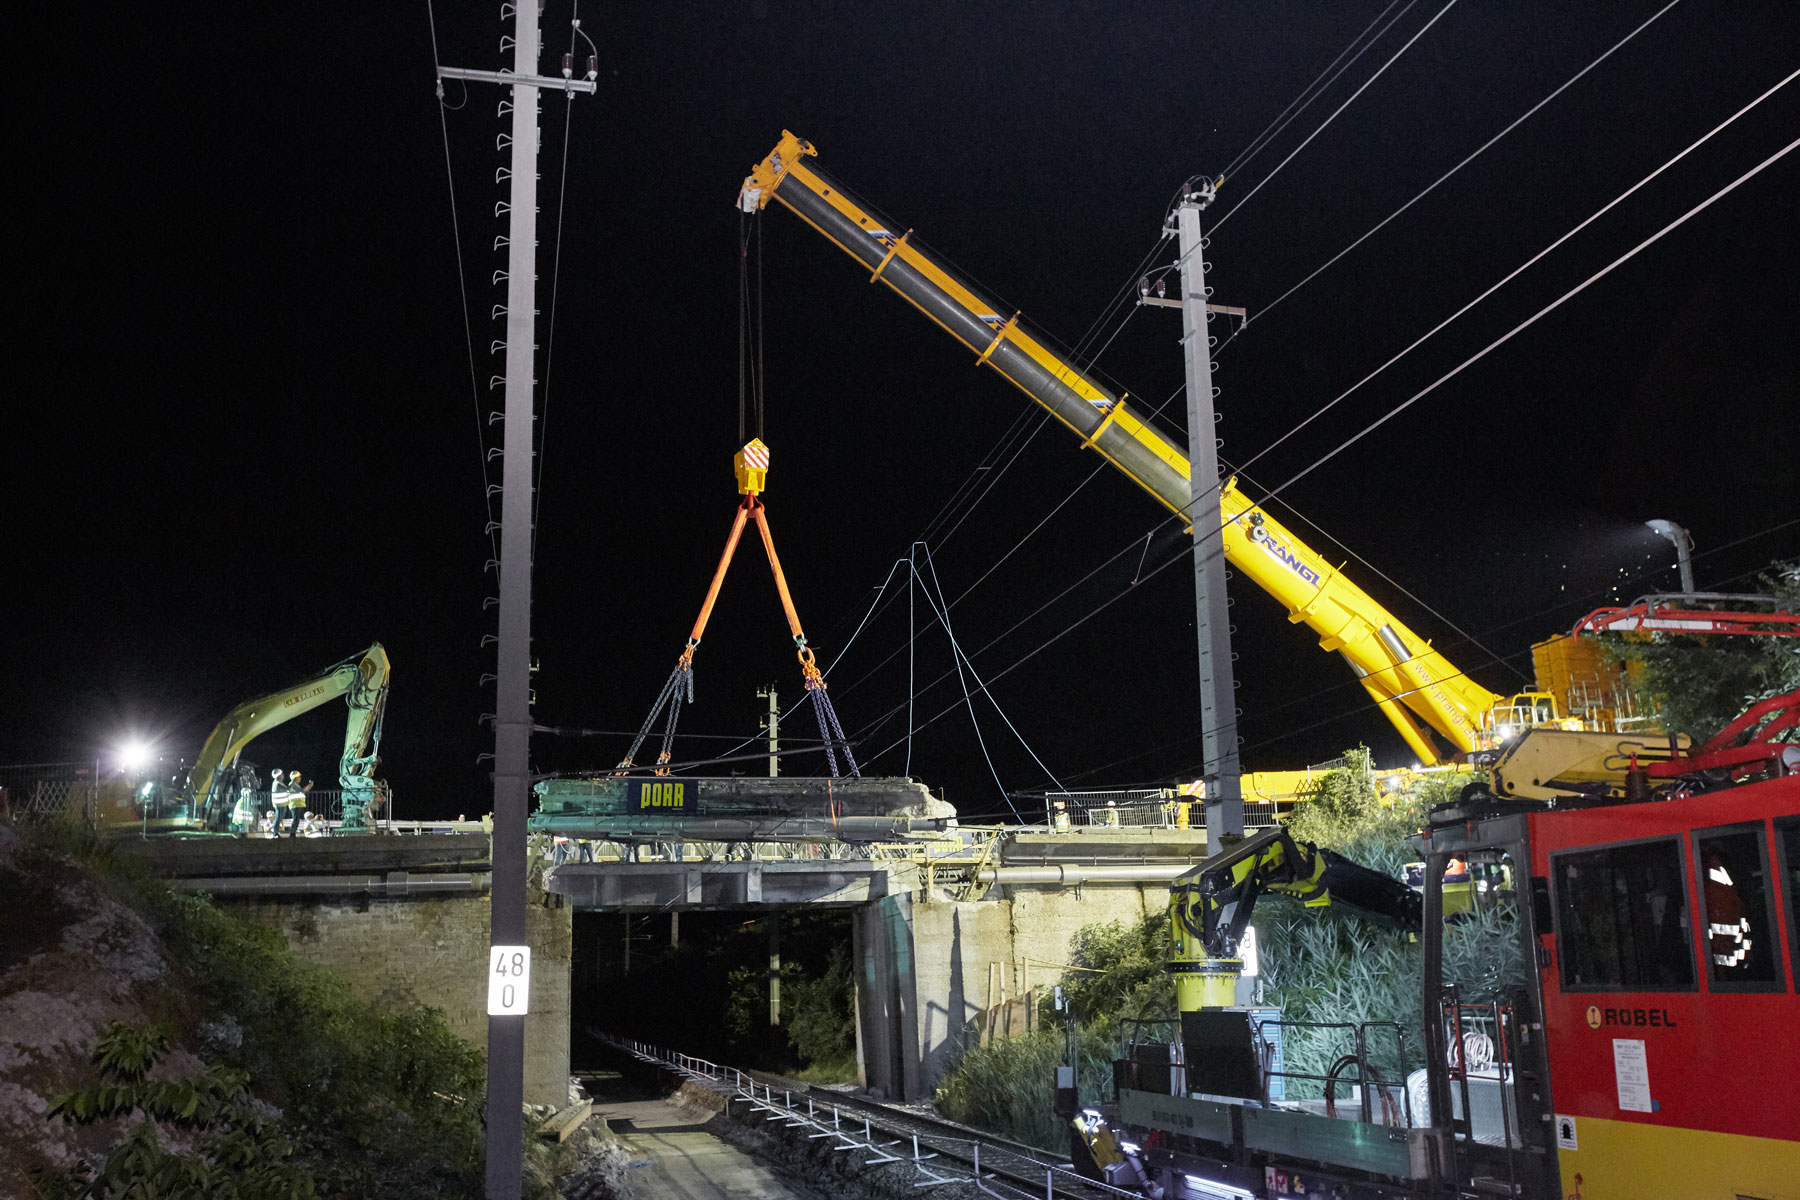 Another successful bridge lifting with Prangl